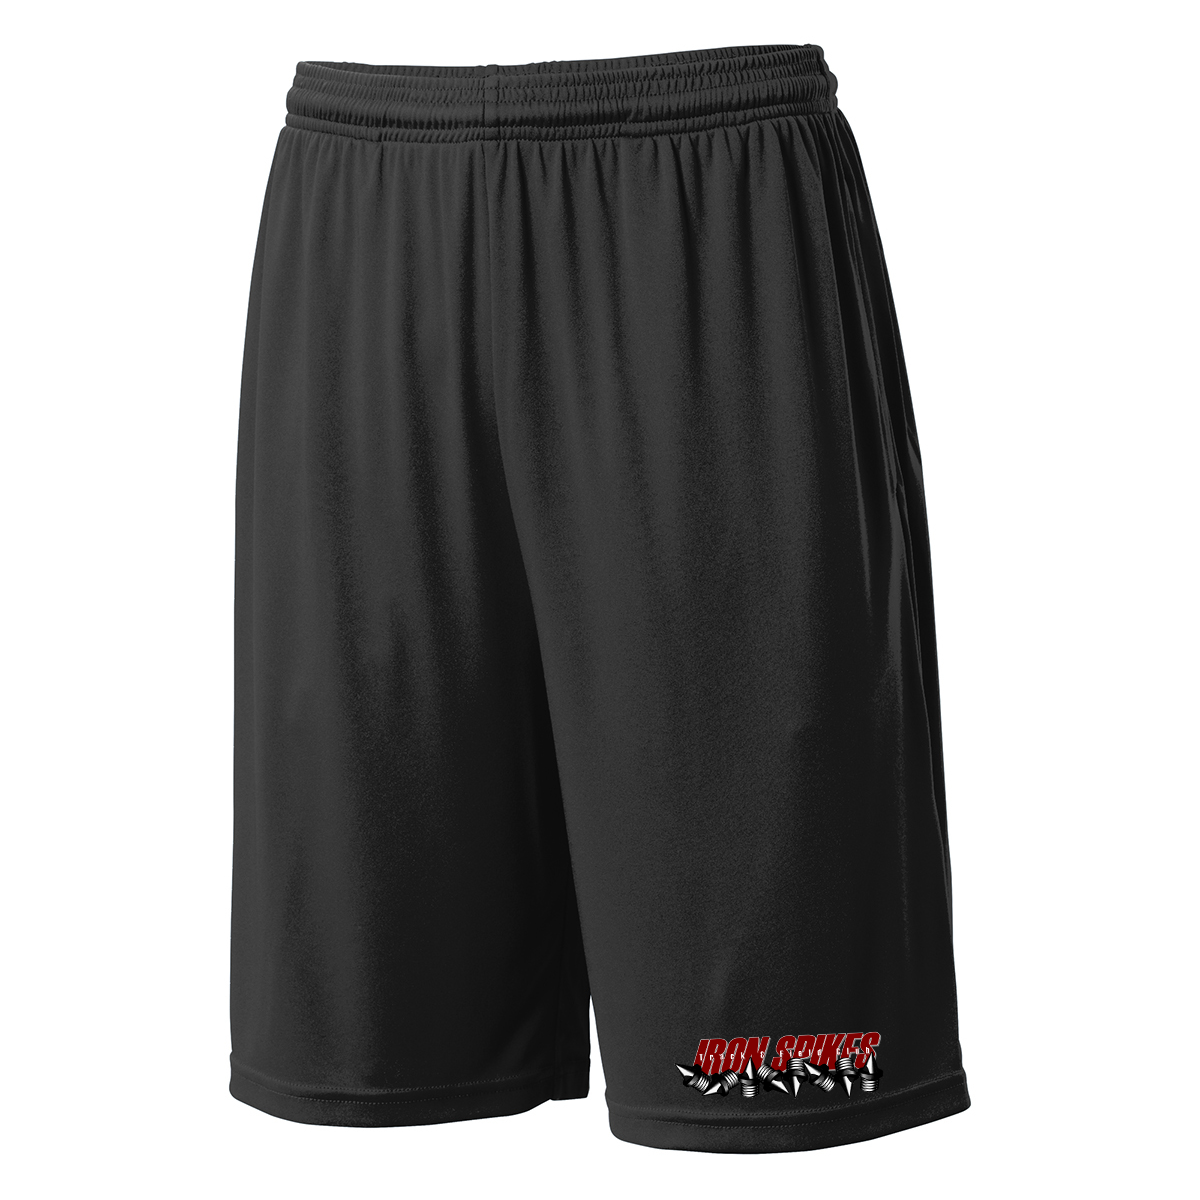 Iron Spikes Track & Field Shorts